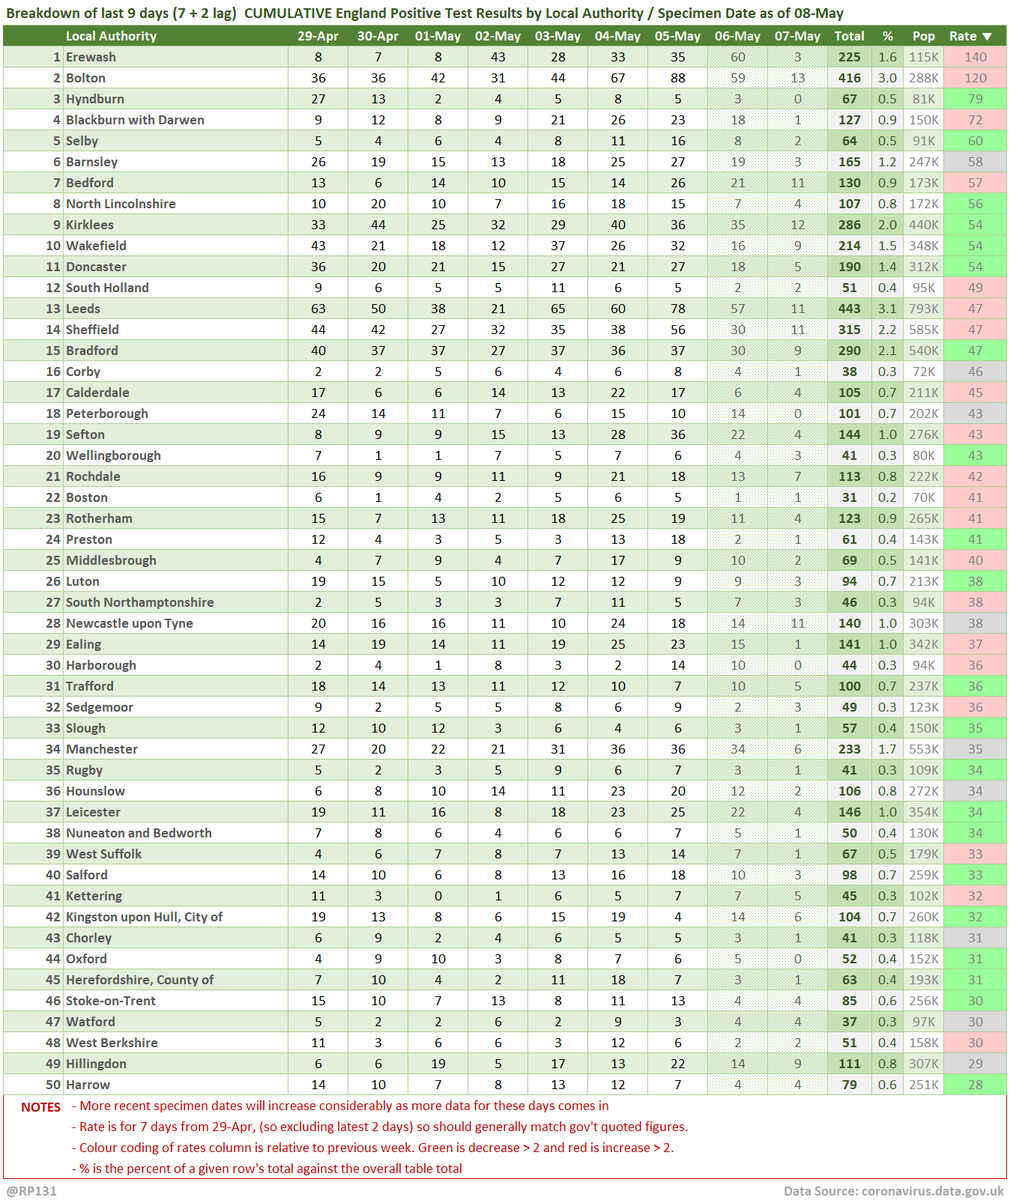  #covid19uk - Tables thread. Starting with the top 50 England Local Authorities by positives per 100K population in last 7 days, up to 3 days ago. Bright green means lower than previous period.